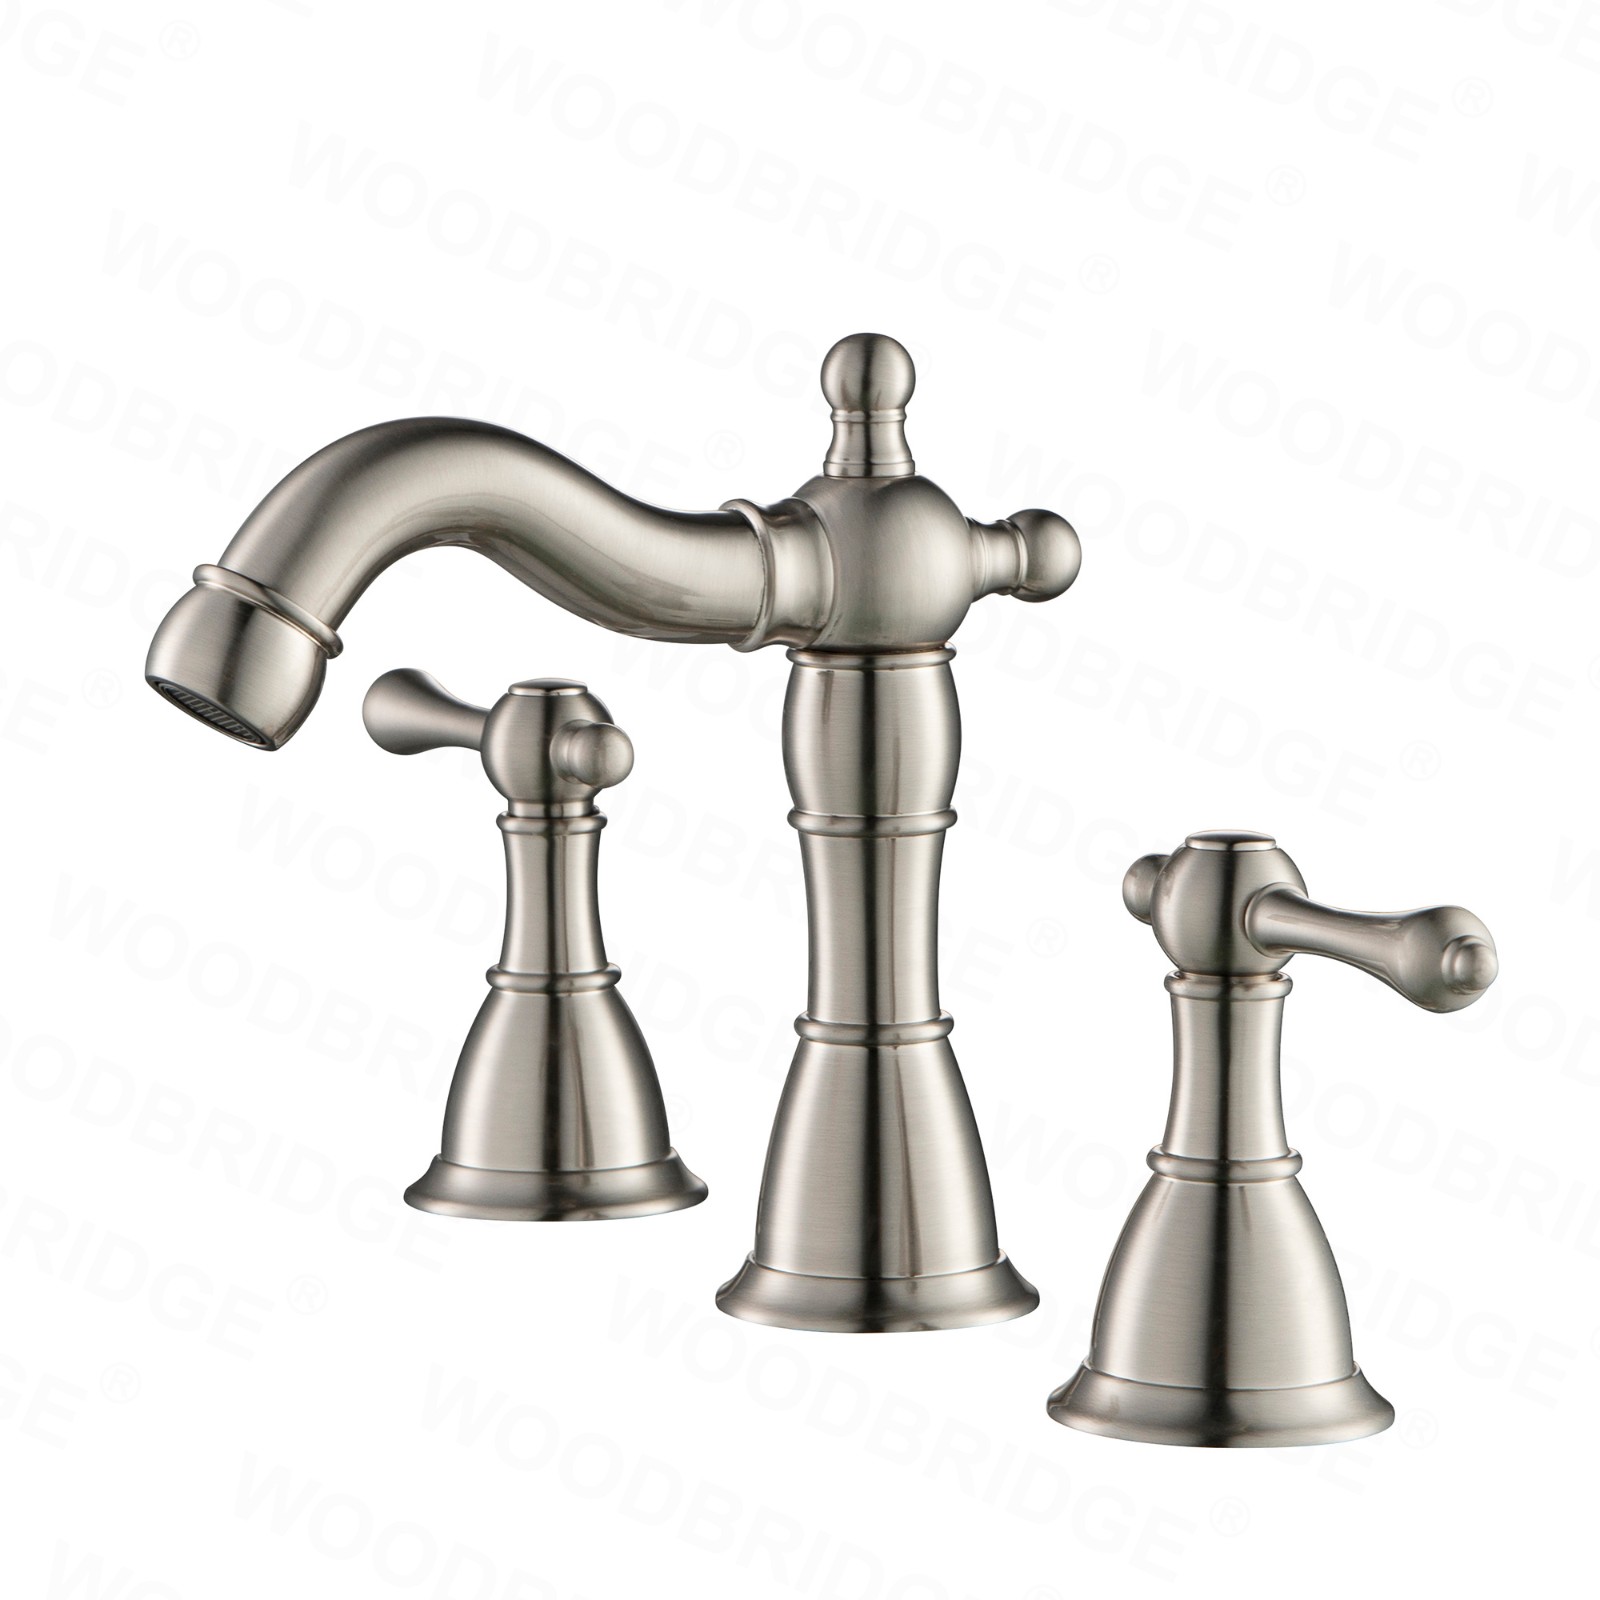  WOODBRIDGE WB802005BN 8-inch 3-hole Widespread Lavatory Faucet with Two Metal Lever Handle, Brushed Nickel_6340